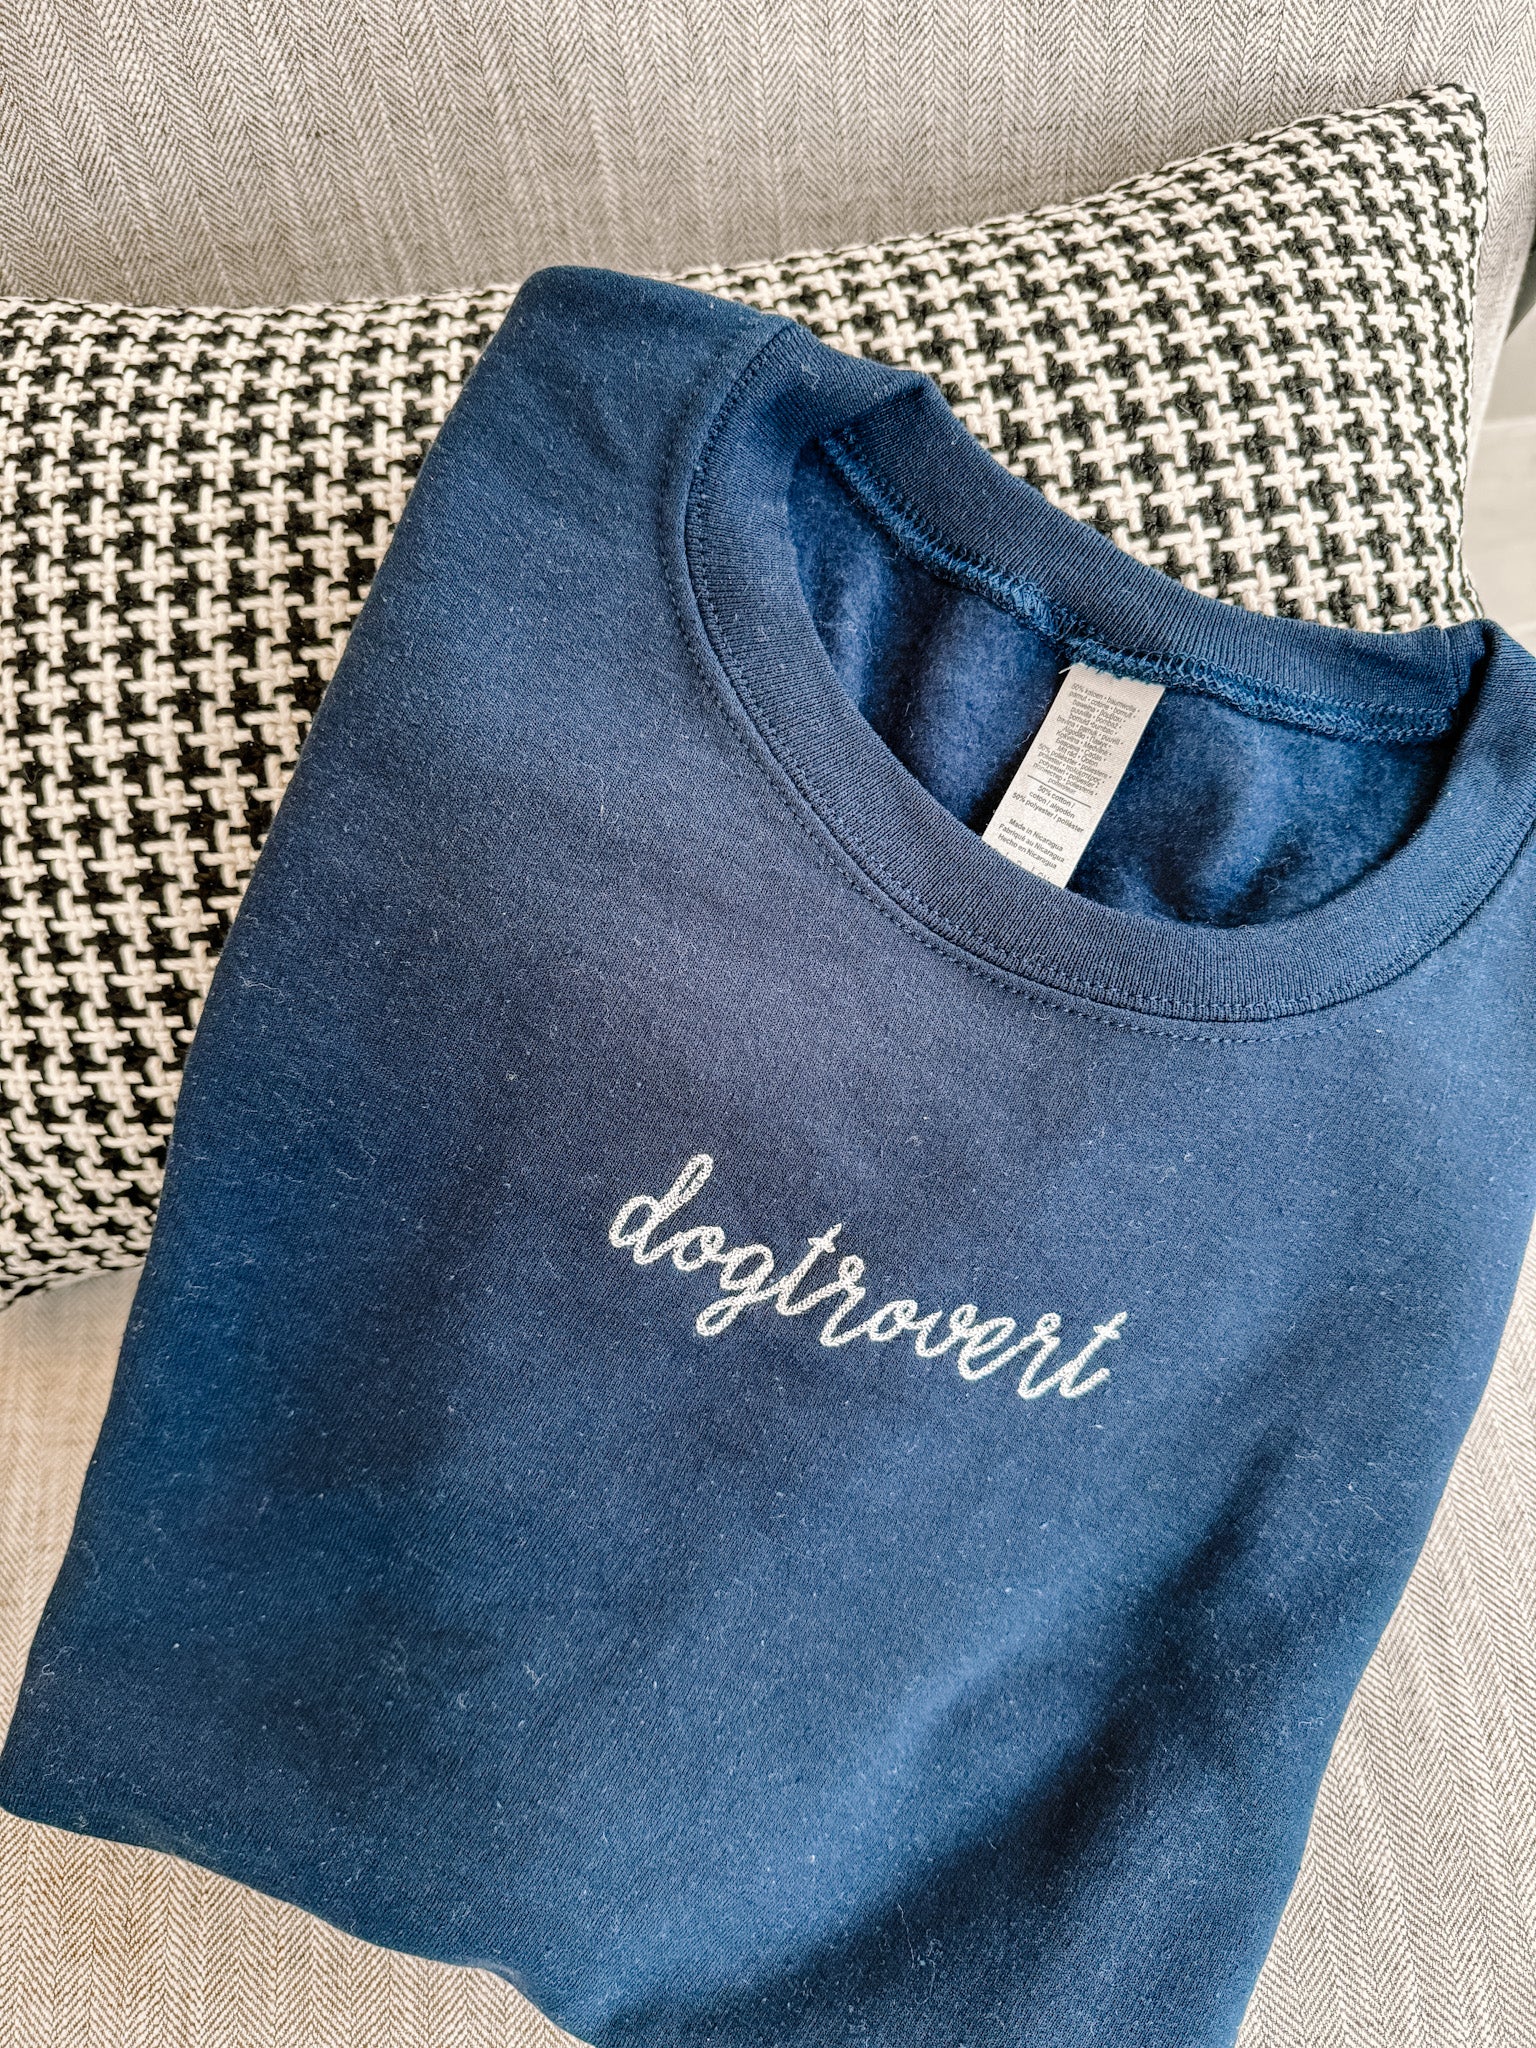 Dogtrovert Embroidered Crewneck